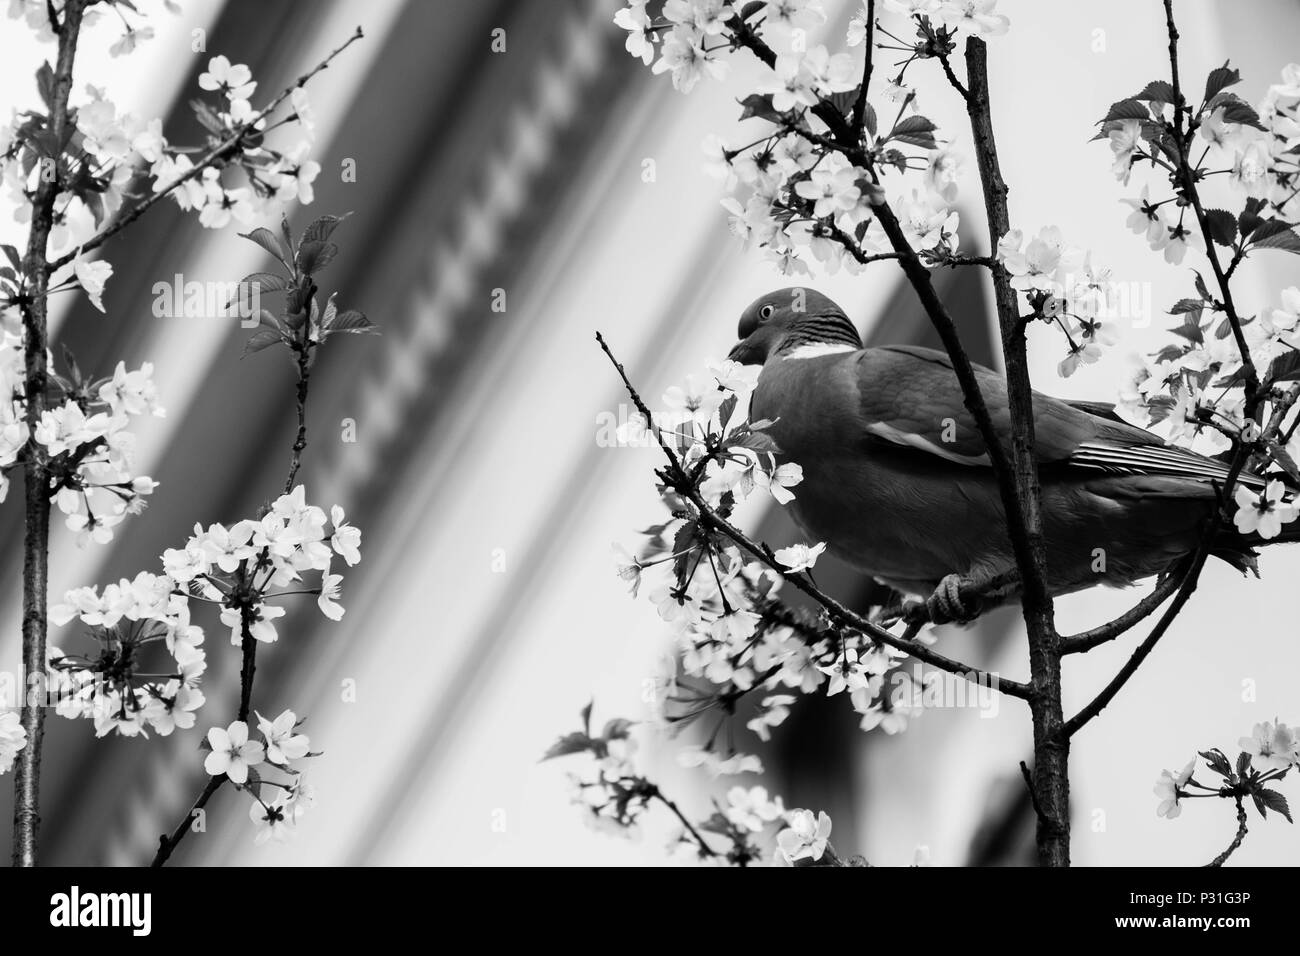 In this black and white photo, a pigeon sits in a flowering tree in Antwerp. As in many cities, pigeons are often seen in Antwerp. Stock Photo